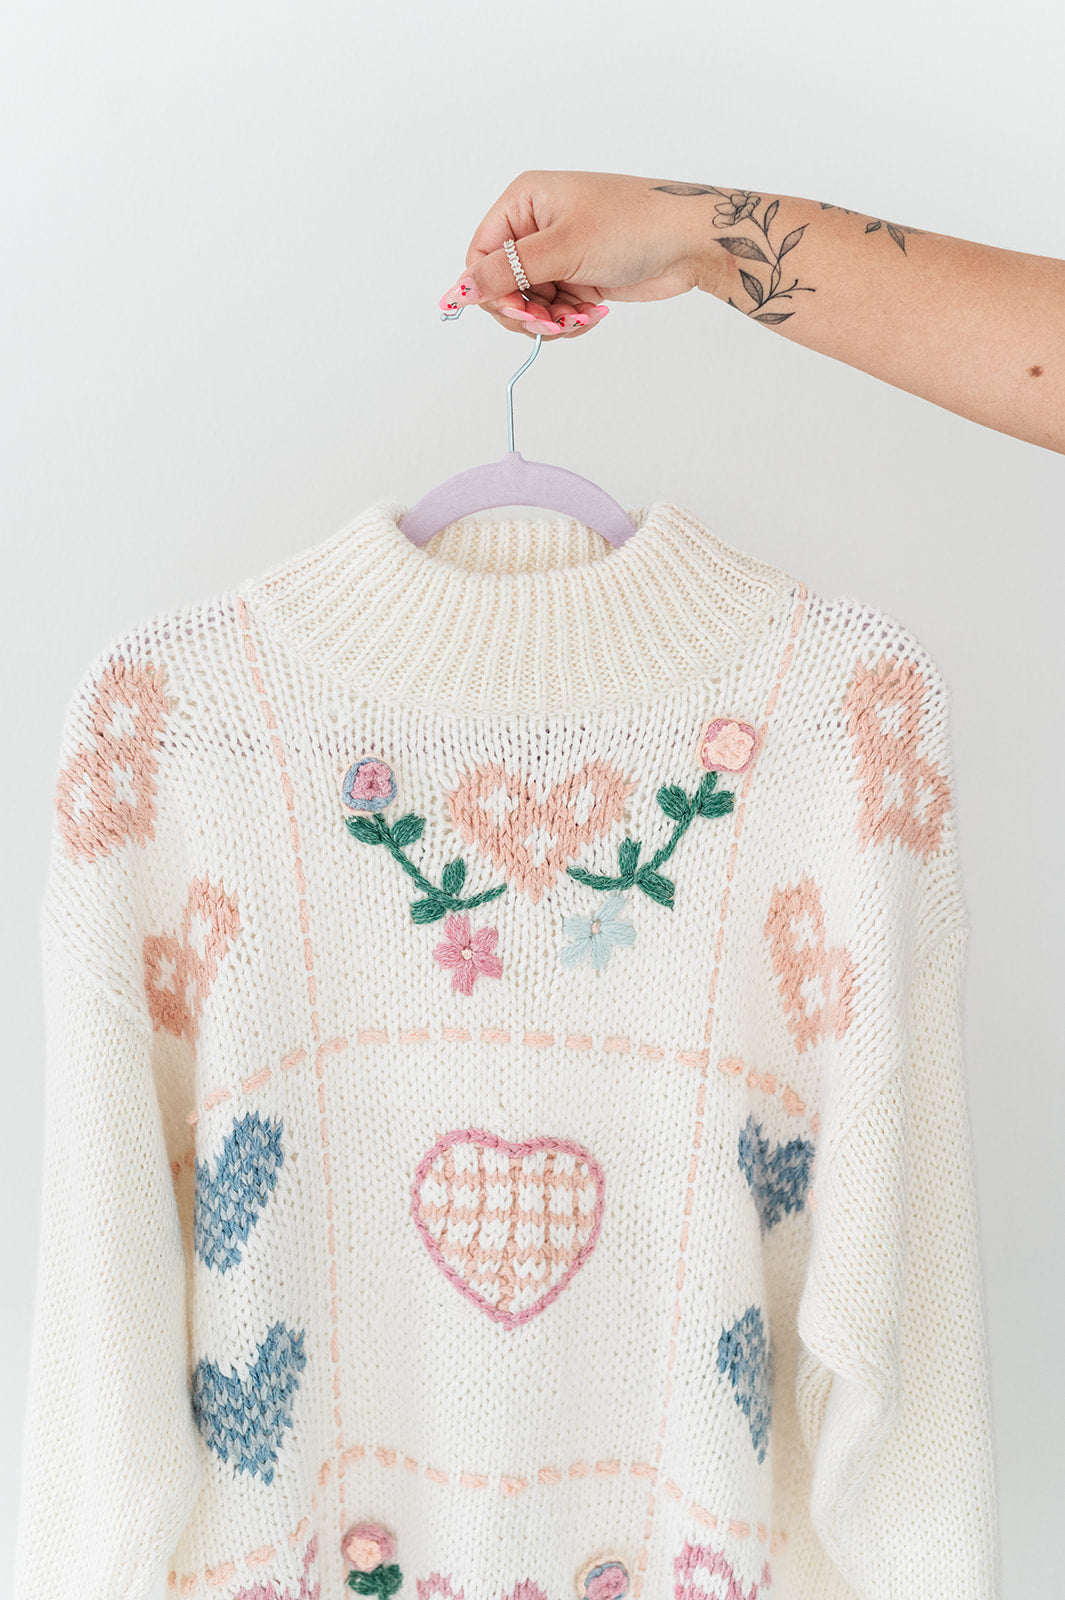 The Everly Sweater